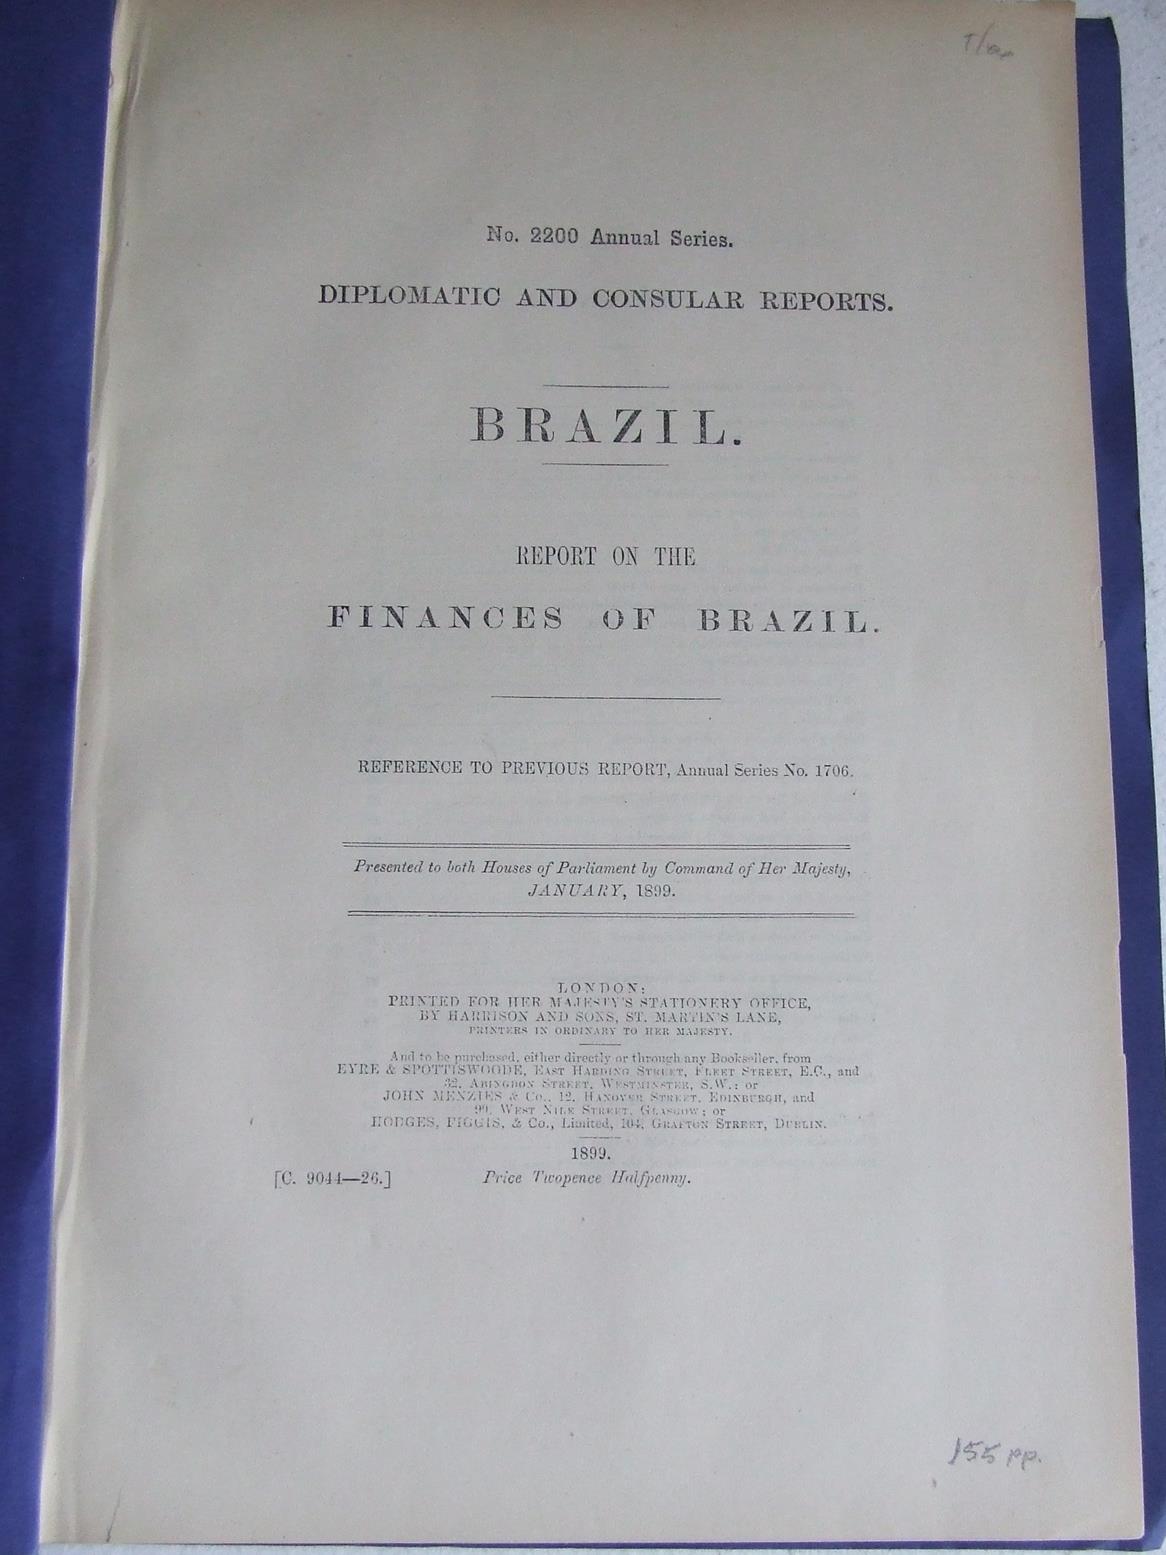 Diplomatic and Consular Reports, Brazil